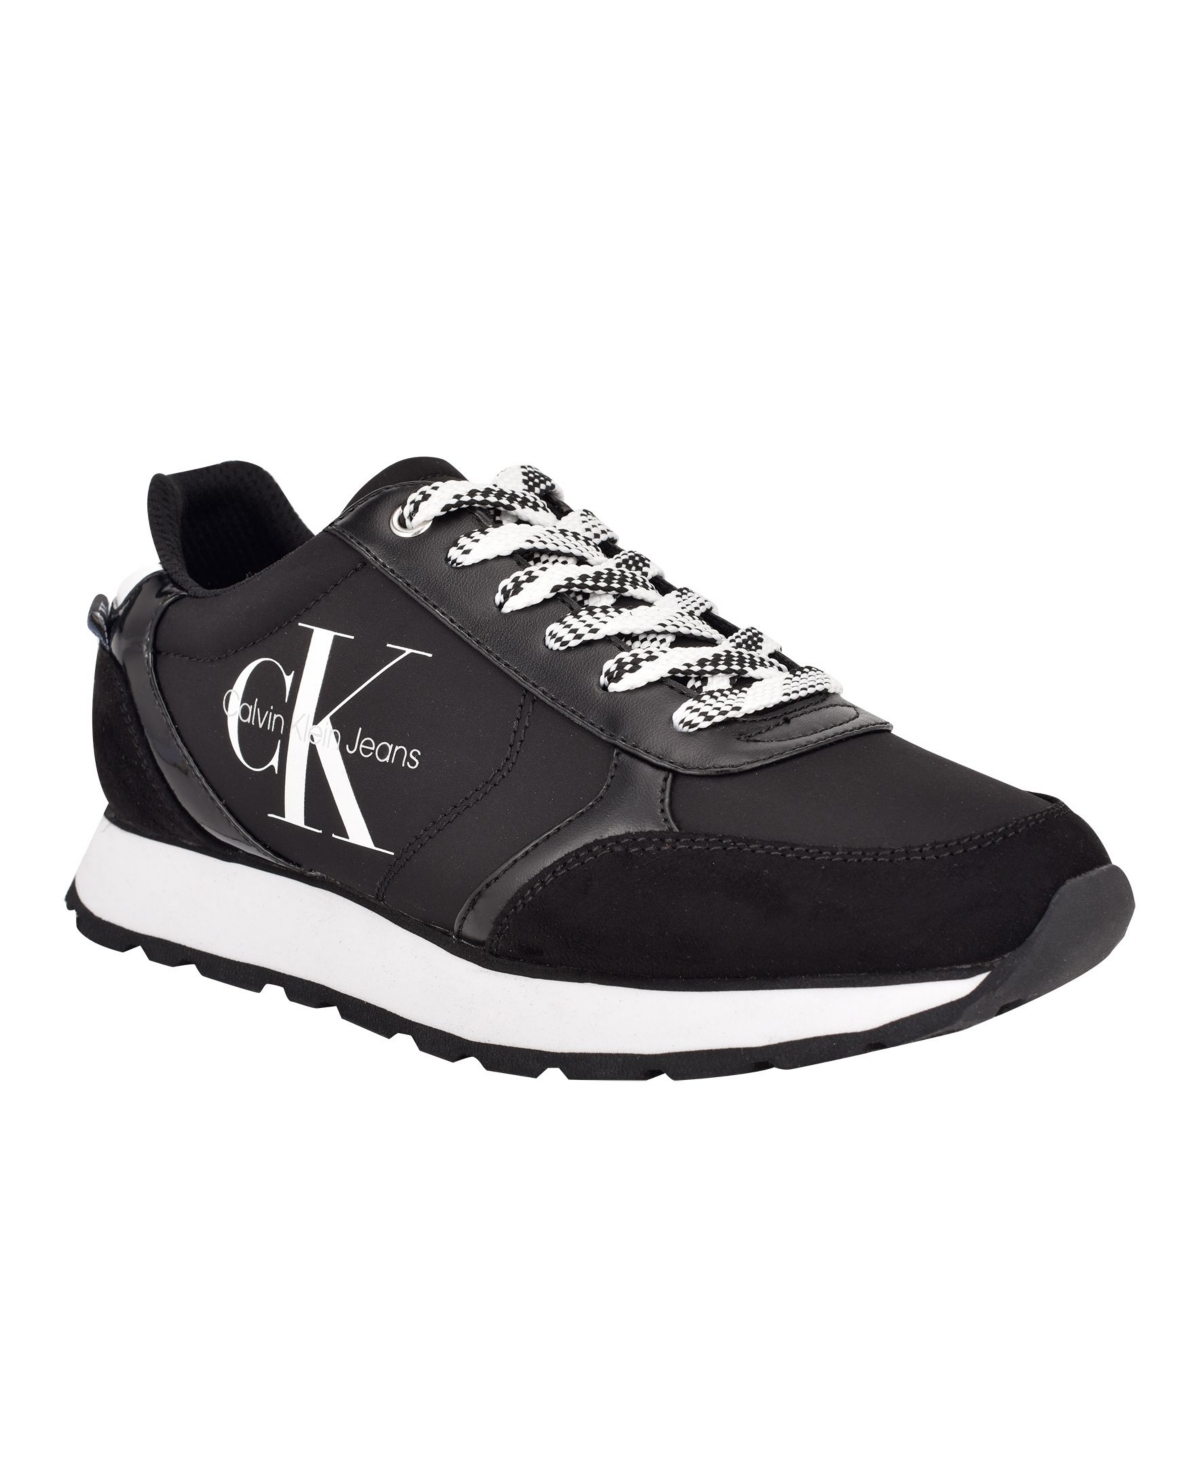 UPC 195182393221 product image for Calvin Klein Jeans Women's Cayle Logo Casual Lace-Up Sneakers Women's Shoes | upcitemdb.com